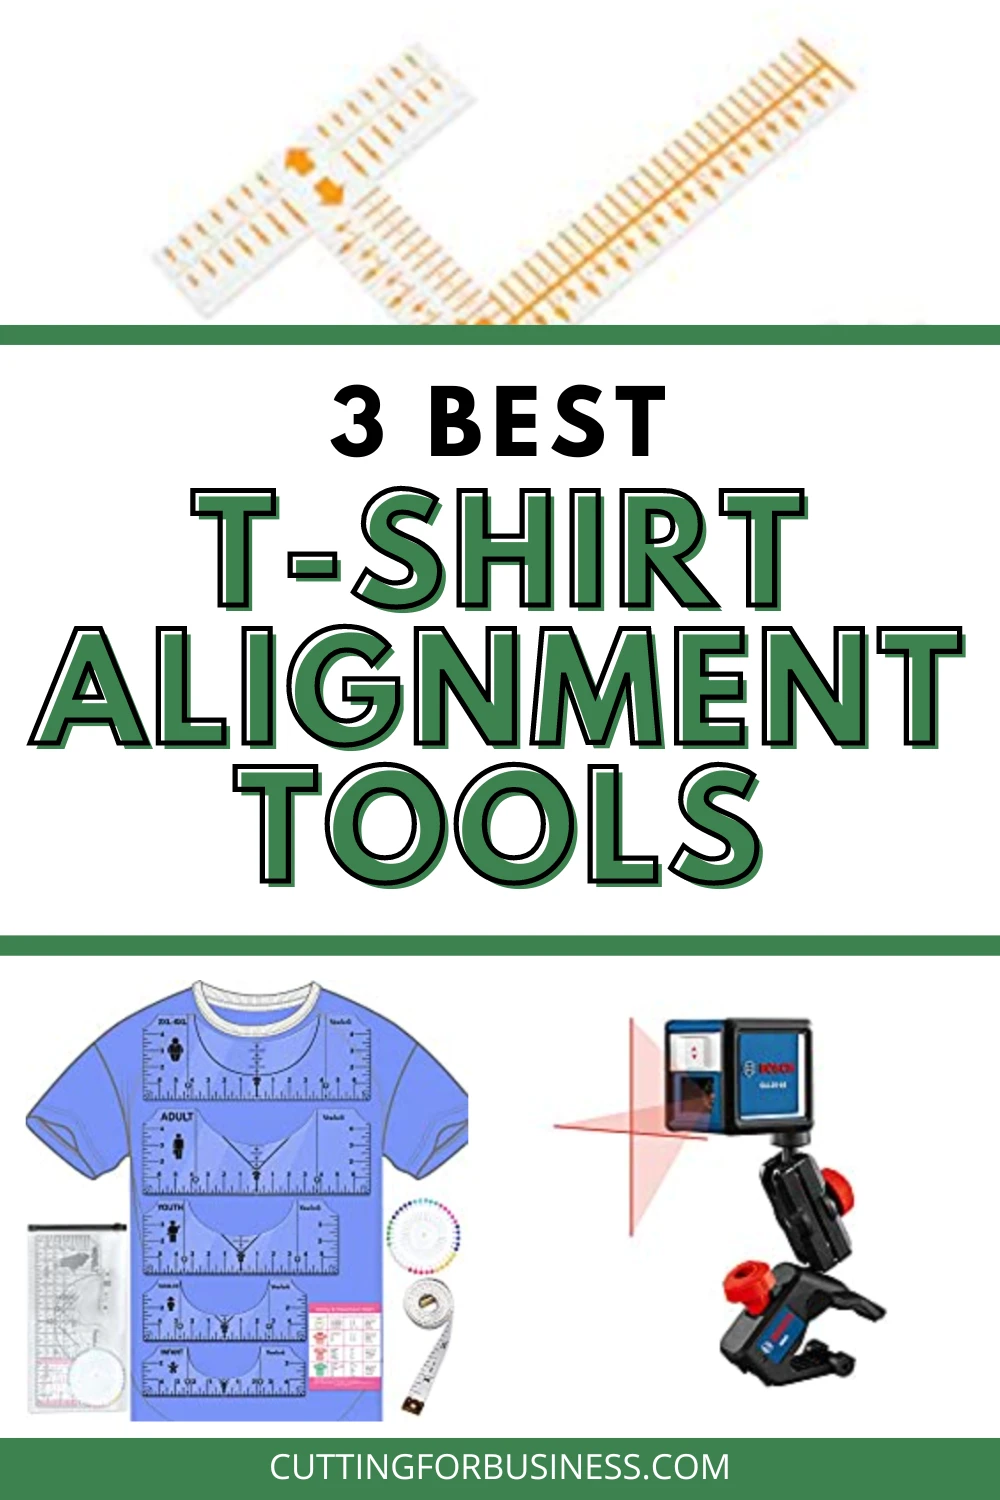 3 Best T-Shirt Alignment Tools - Cutting for Business